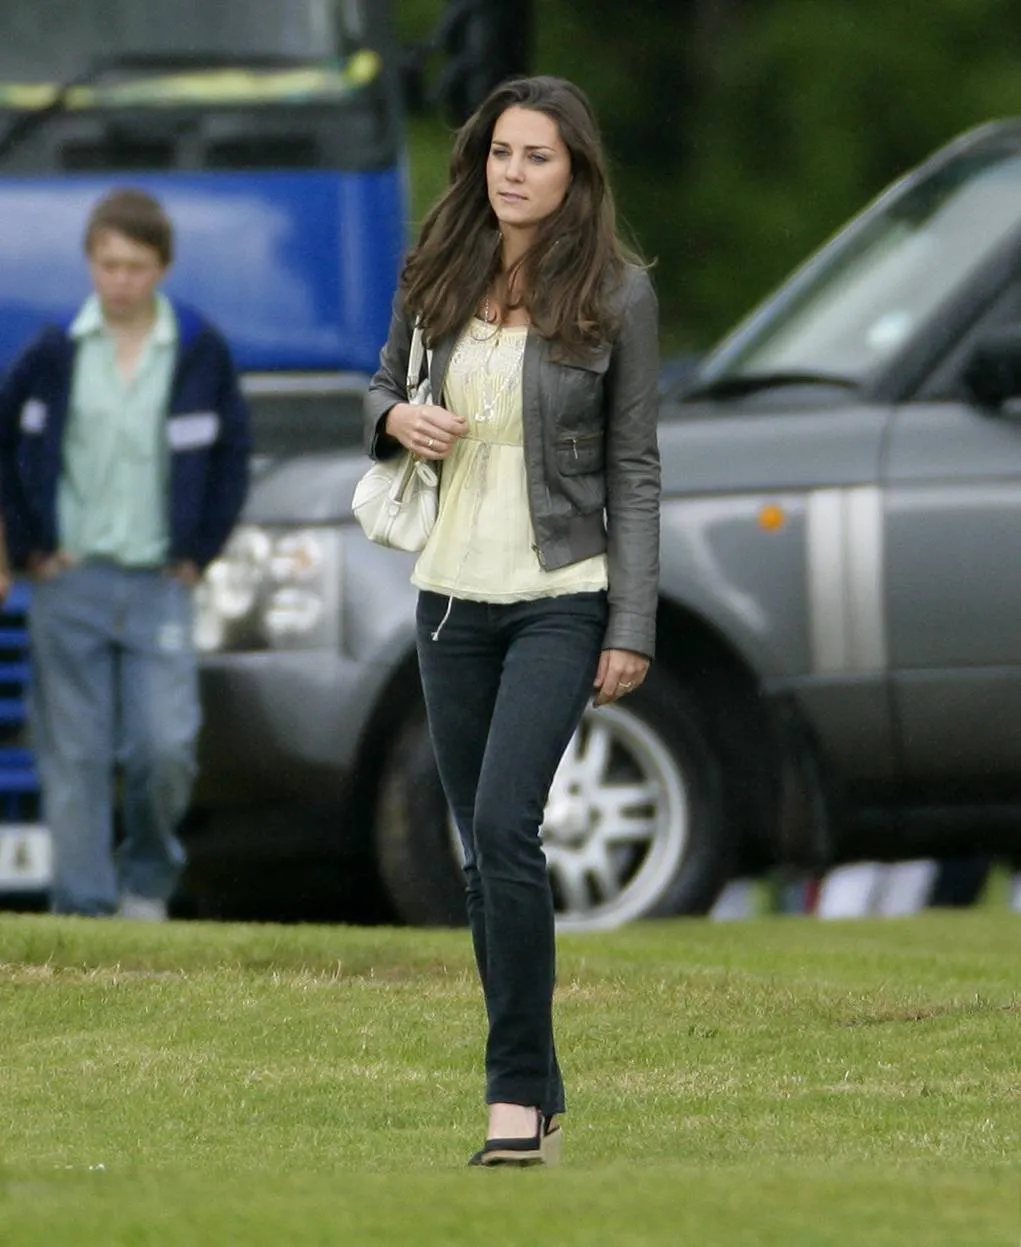 Kate Middleton wears a casual outfit with jeans and a a shirt to watch Prince William play polo in 2009.